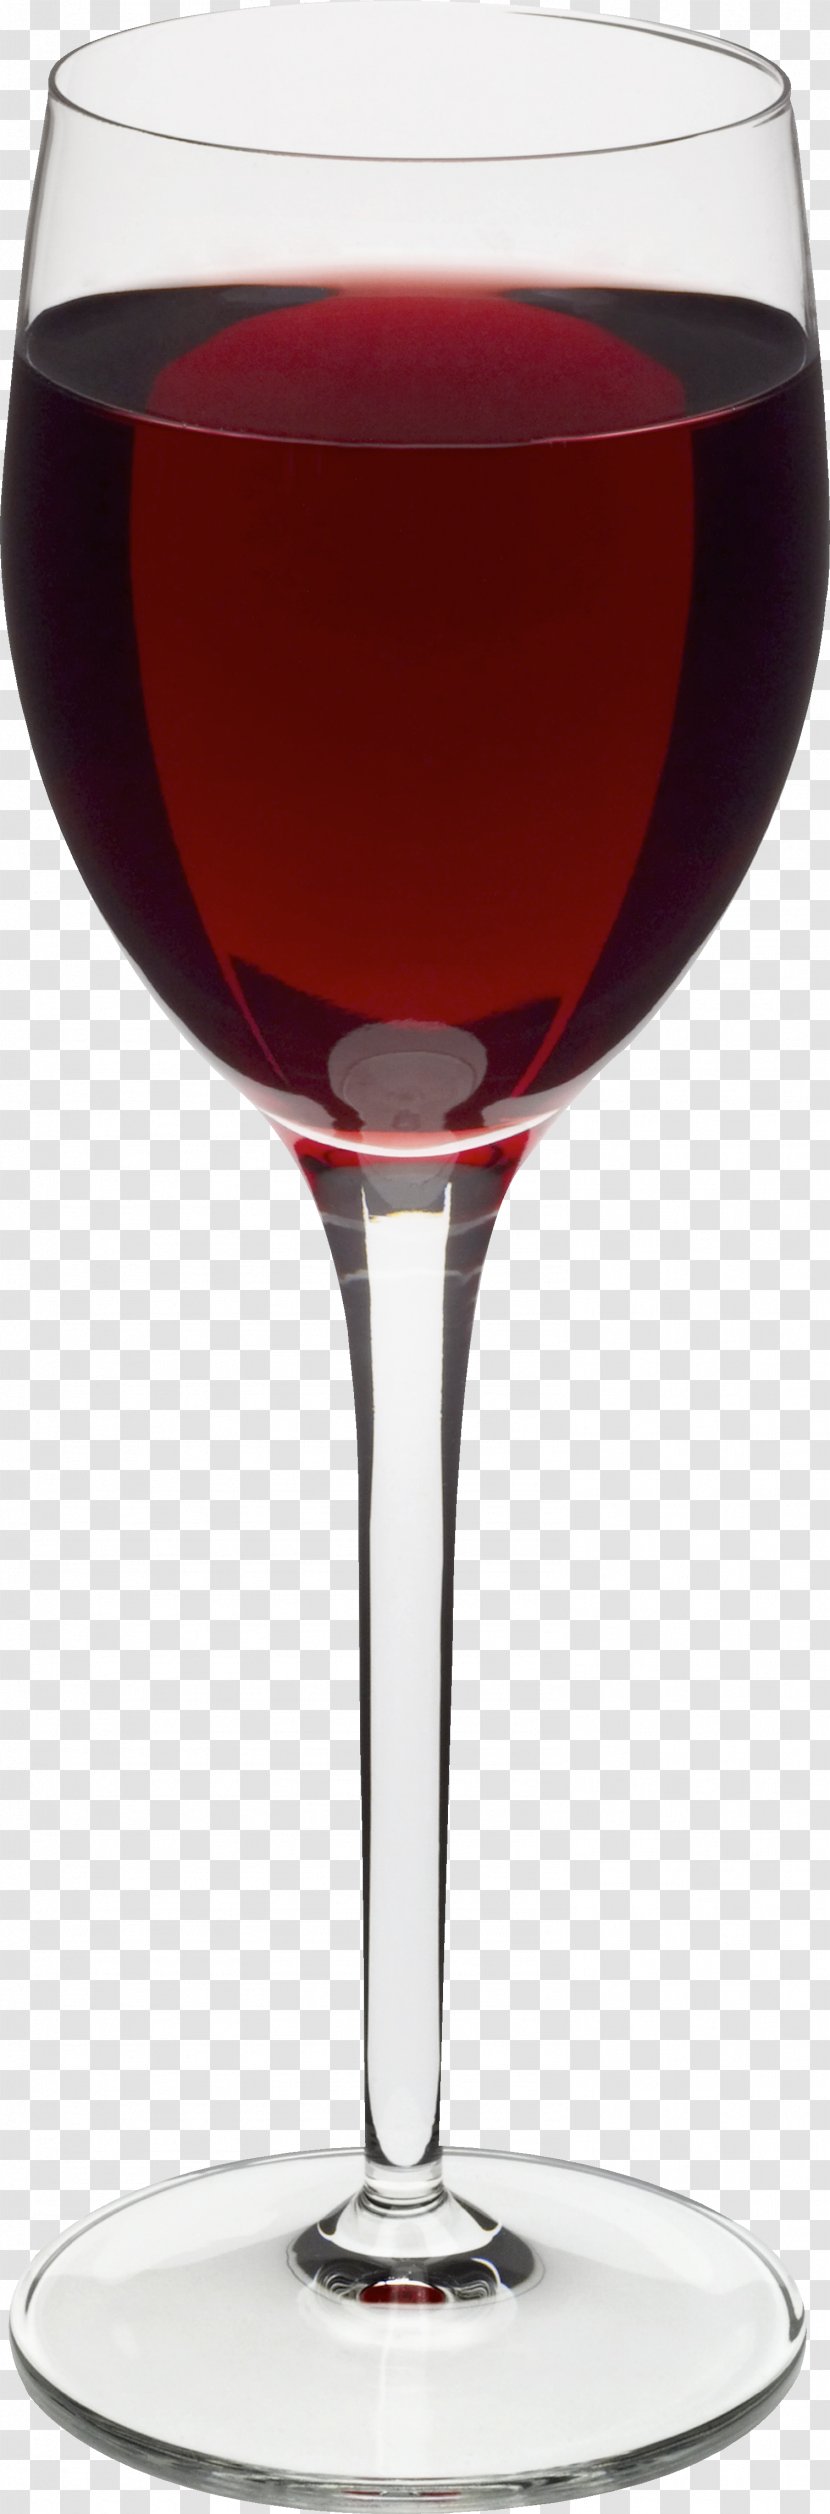 Red Wine White Glass - Image Transparent PNG